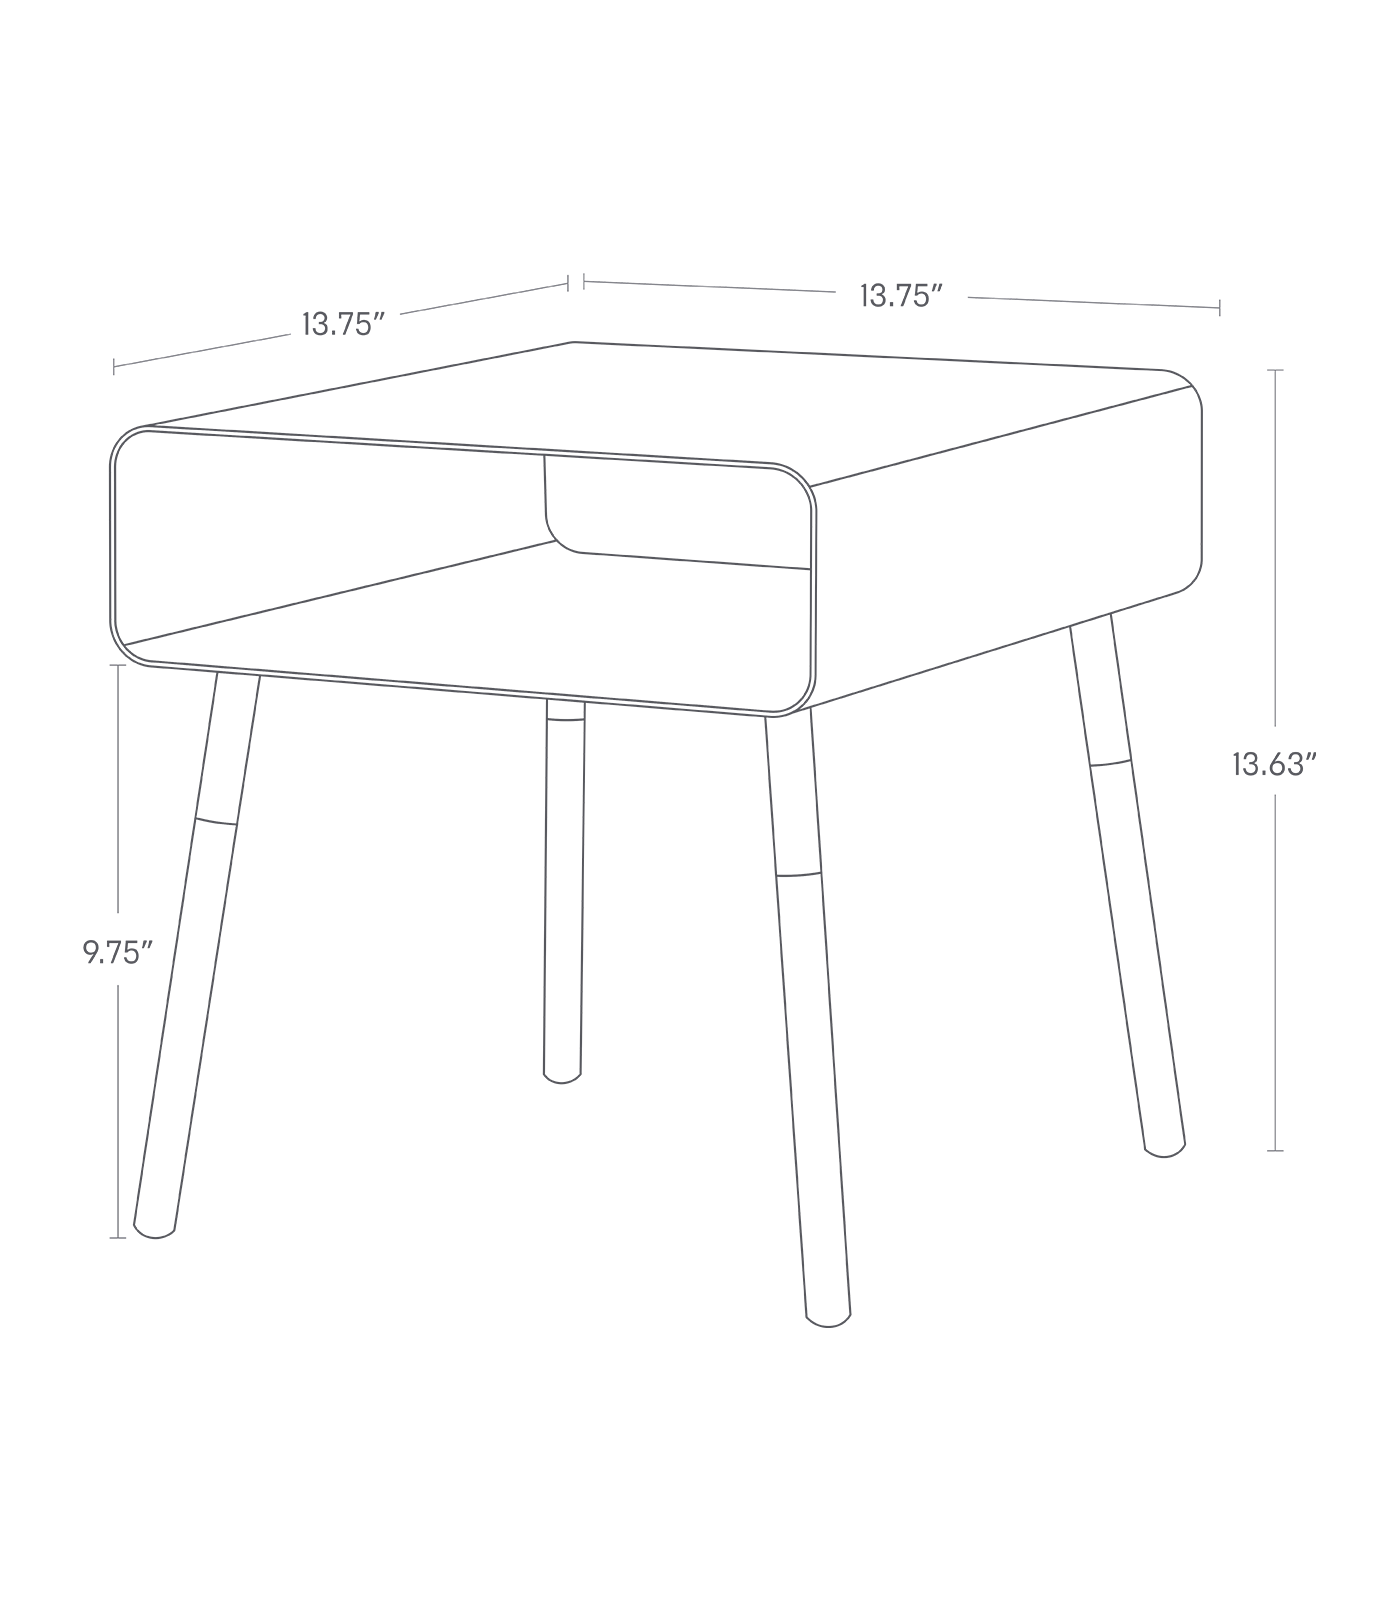 PLAIN Storage Table. Size: Short. Overall length 13.63 inches. Legs 9.75 inches long. Table top 13.75 inches by 13.75 inches.